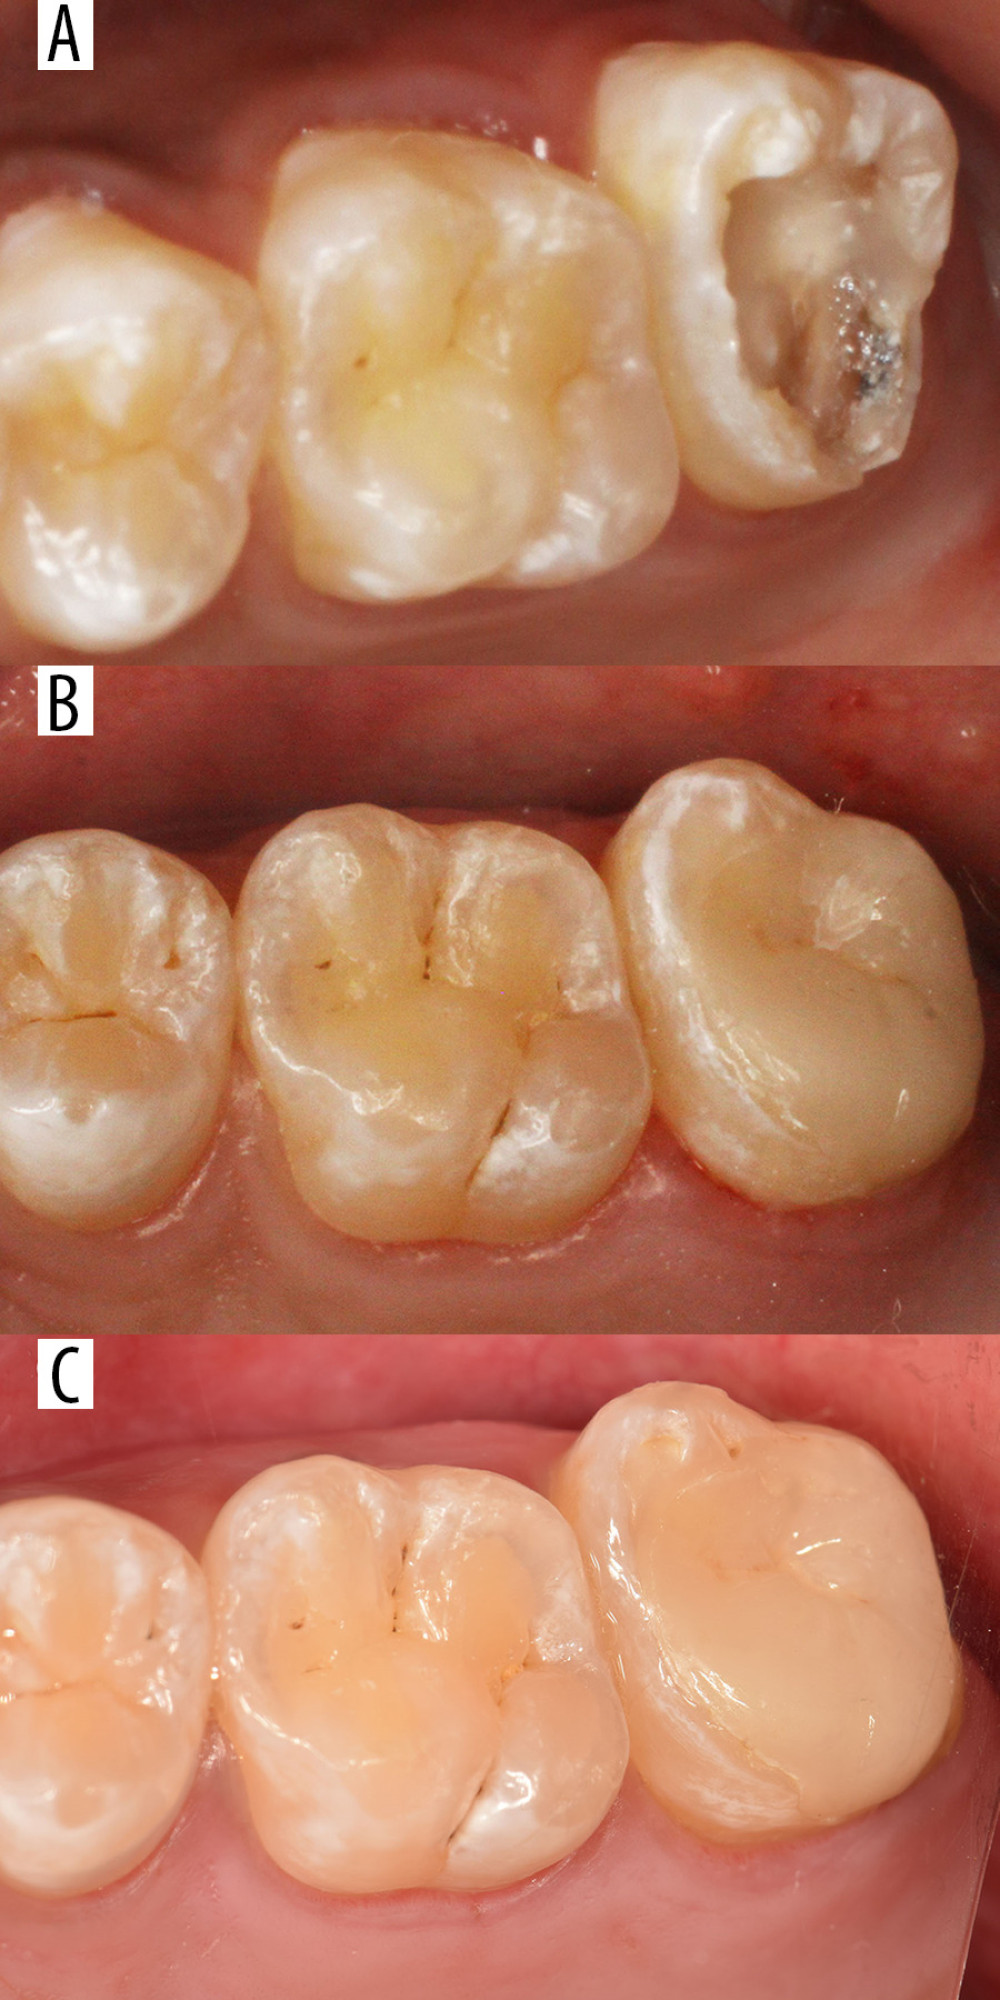 Tooth 27 restored with a lithium disilicate-based glass ceramic (LDGC) onlay. (A) Before cavity preparation. (B)4Restoration after bonding (baseline). (C) Restoration after 36 months.